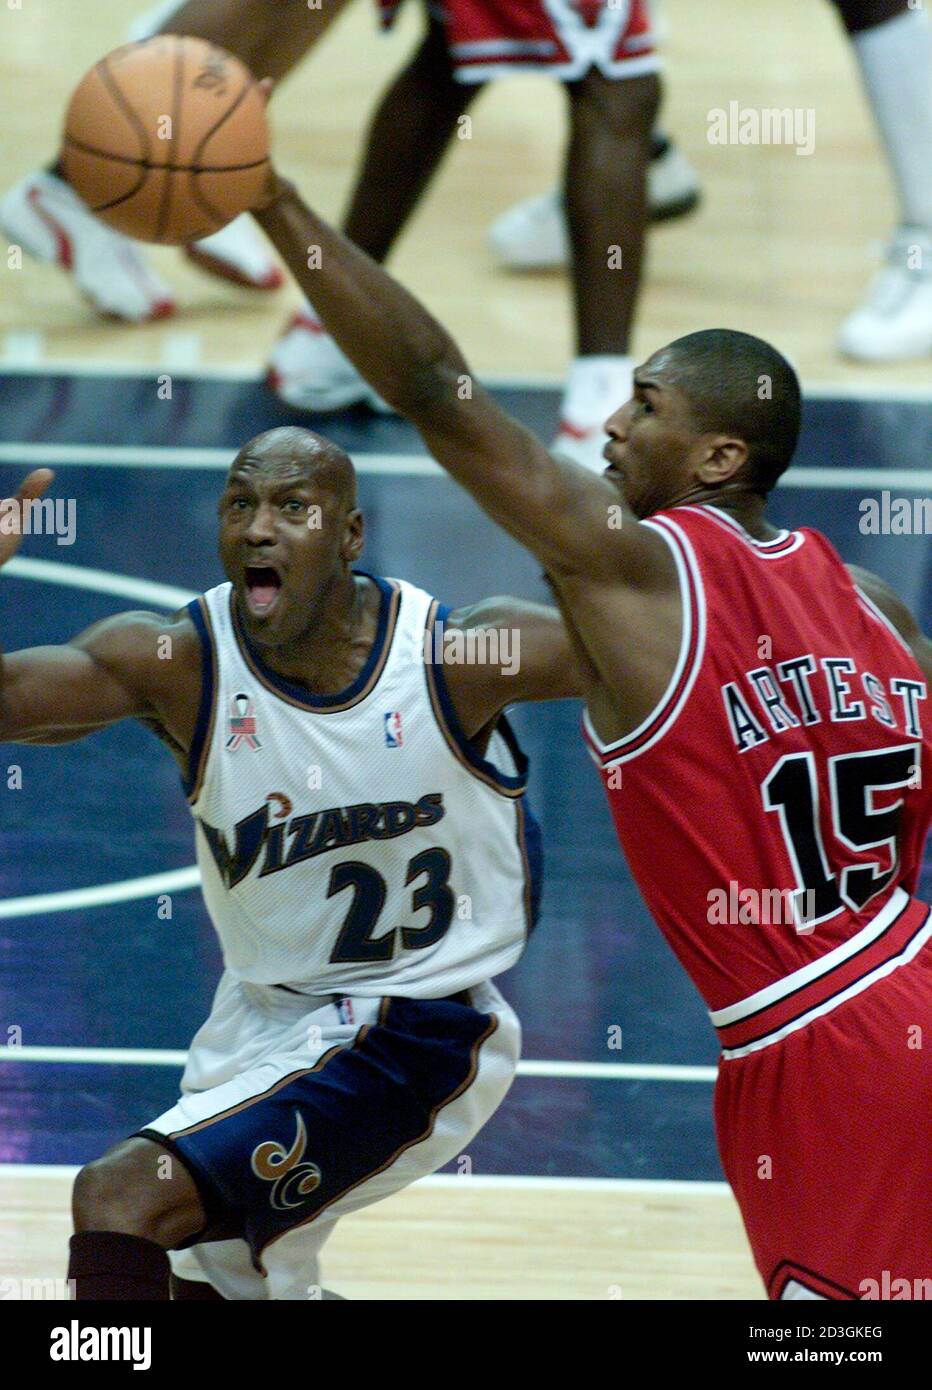 Chicago Bulls' Ron Artest (R) reaches to slap a pass away that was intended  for Washington Wizards' Michael Jordan (L) in the first quarter of their  game at the MCI Center in